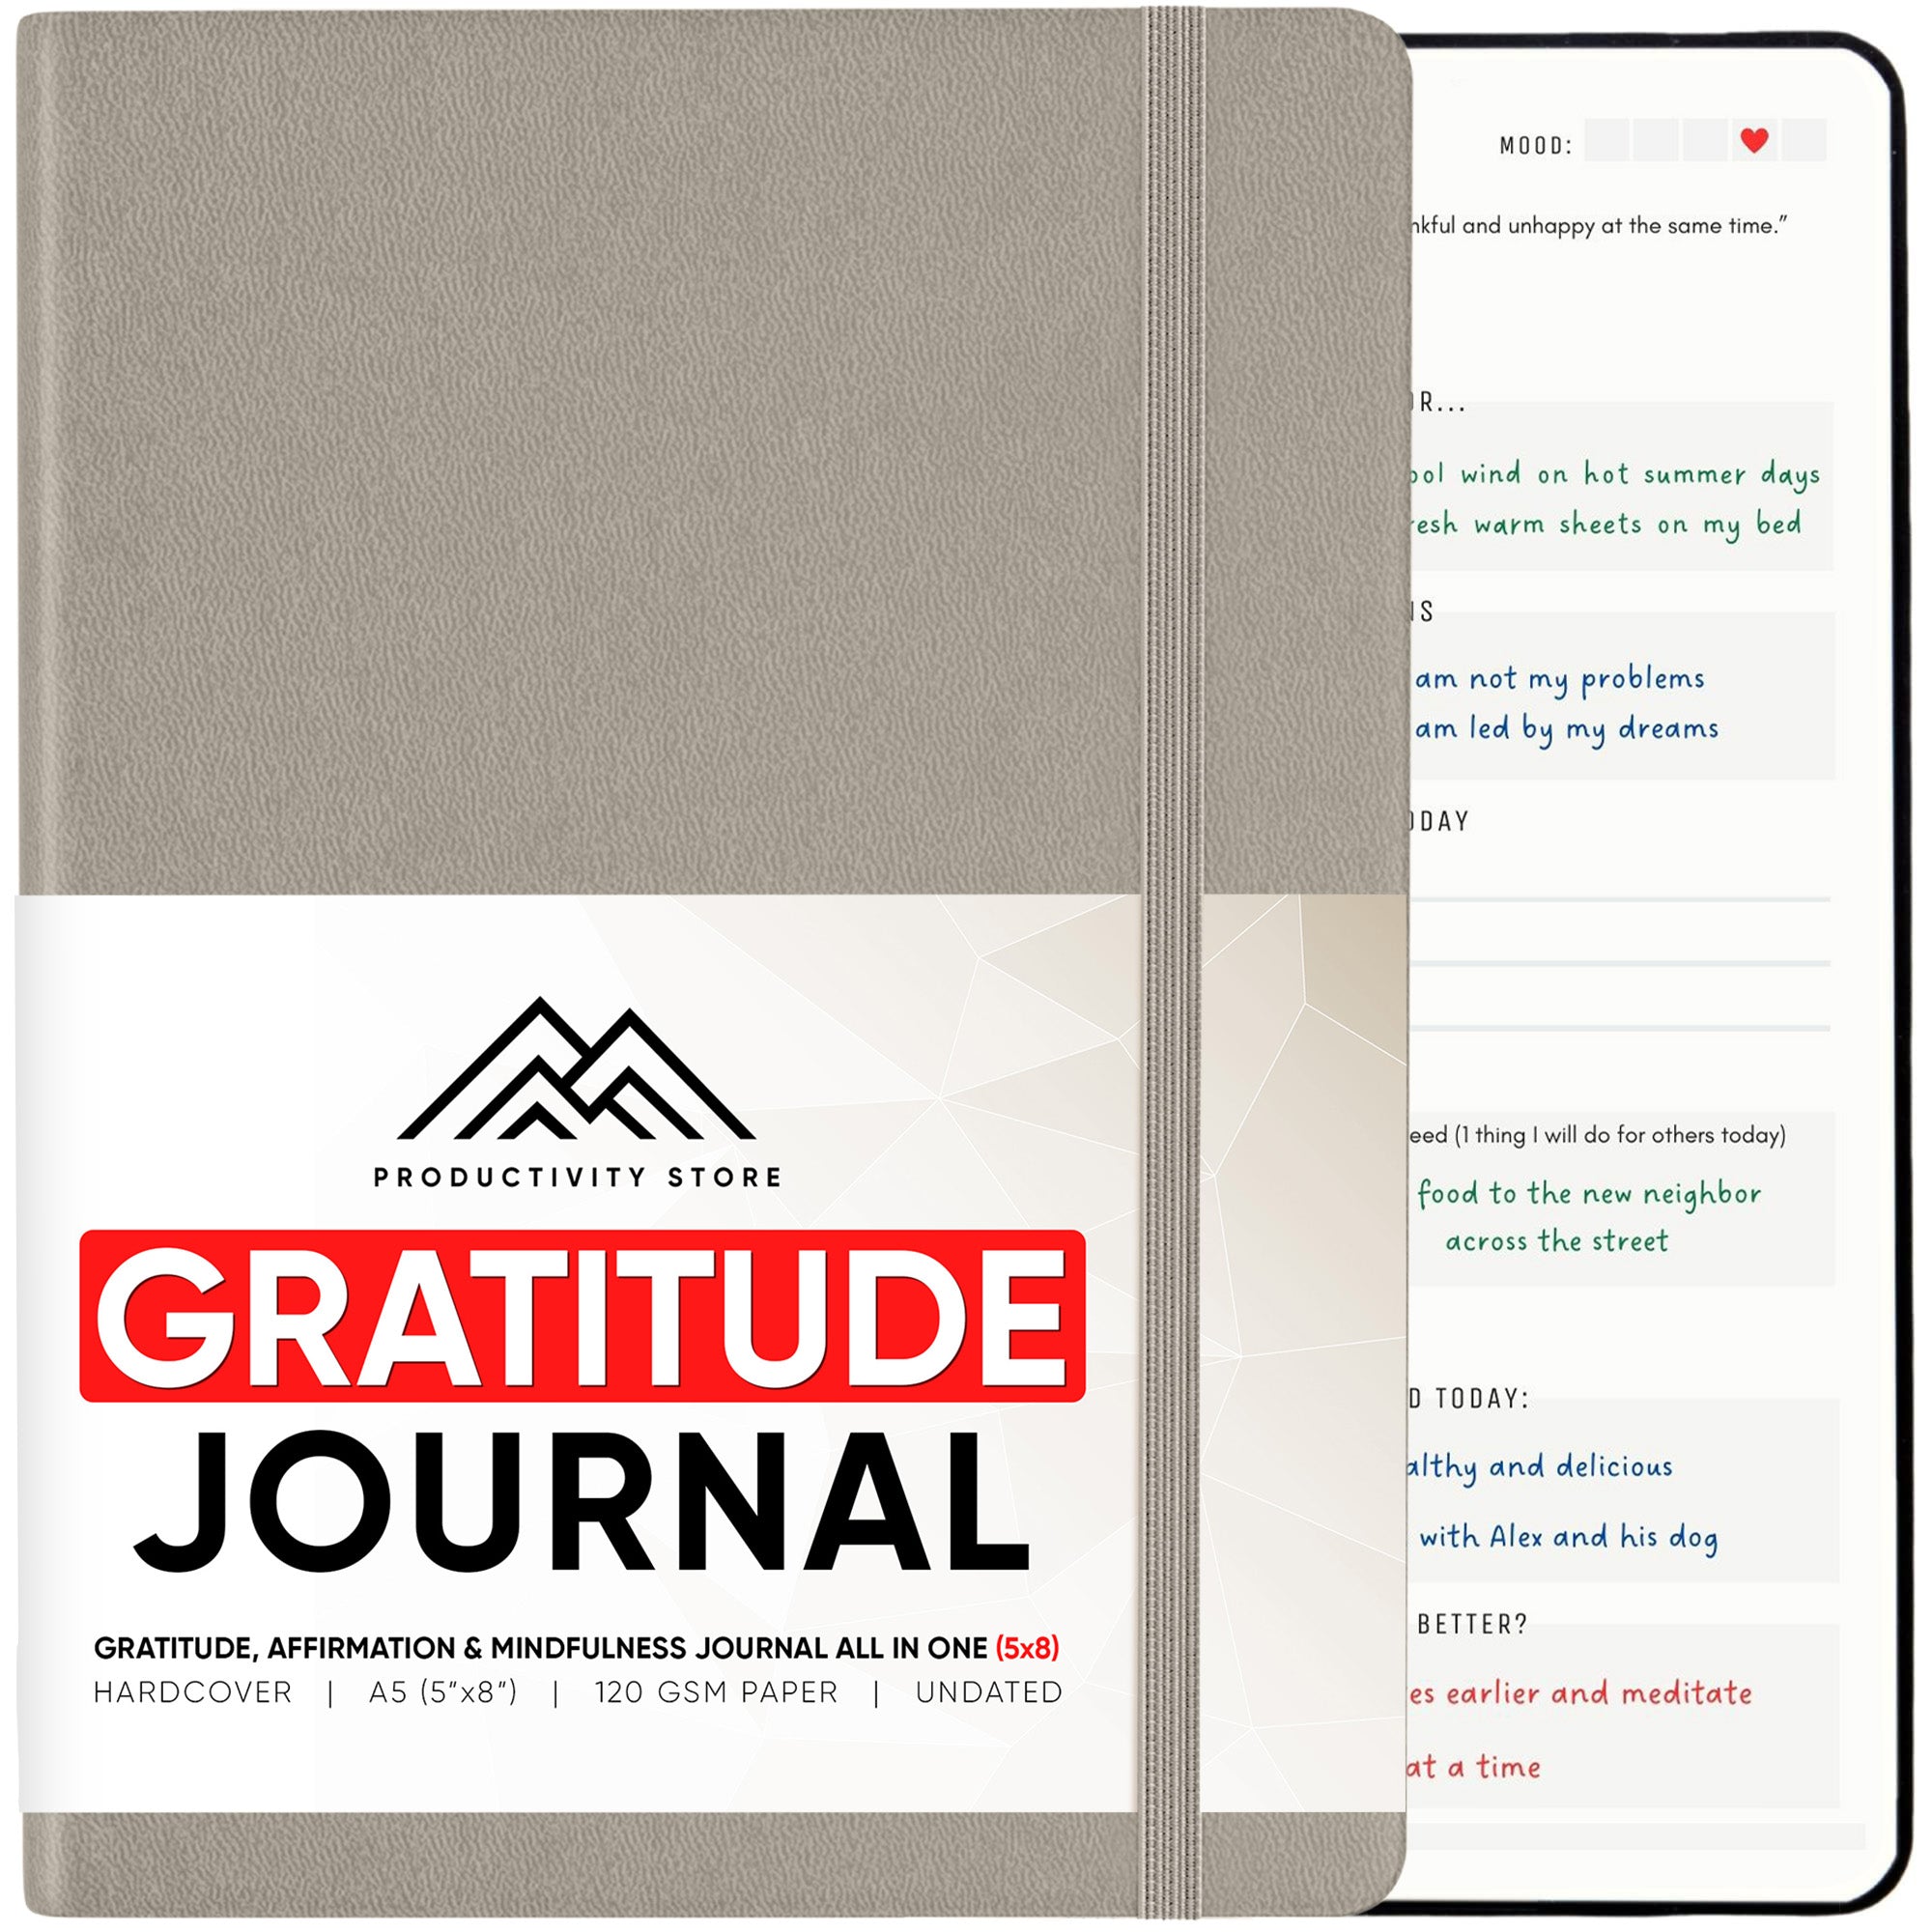 Gratitude Journal: The Science Behind Its Benefits